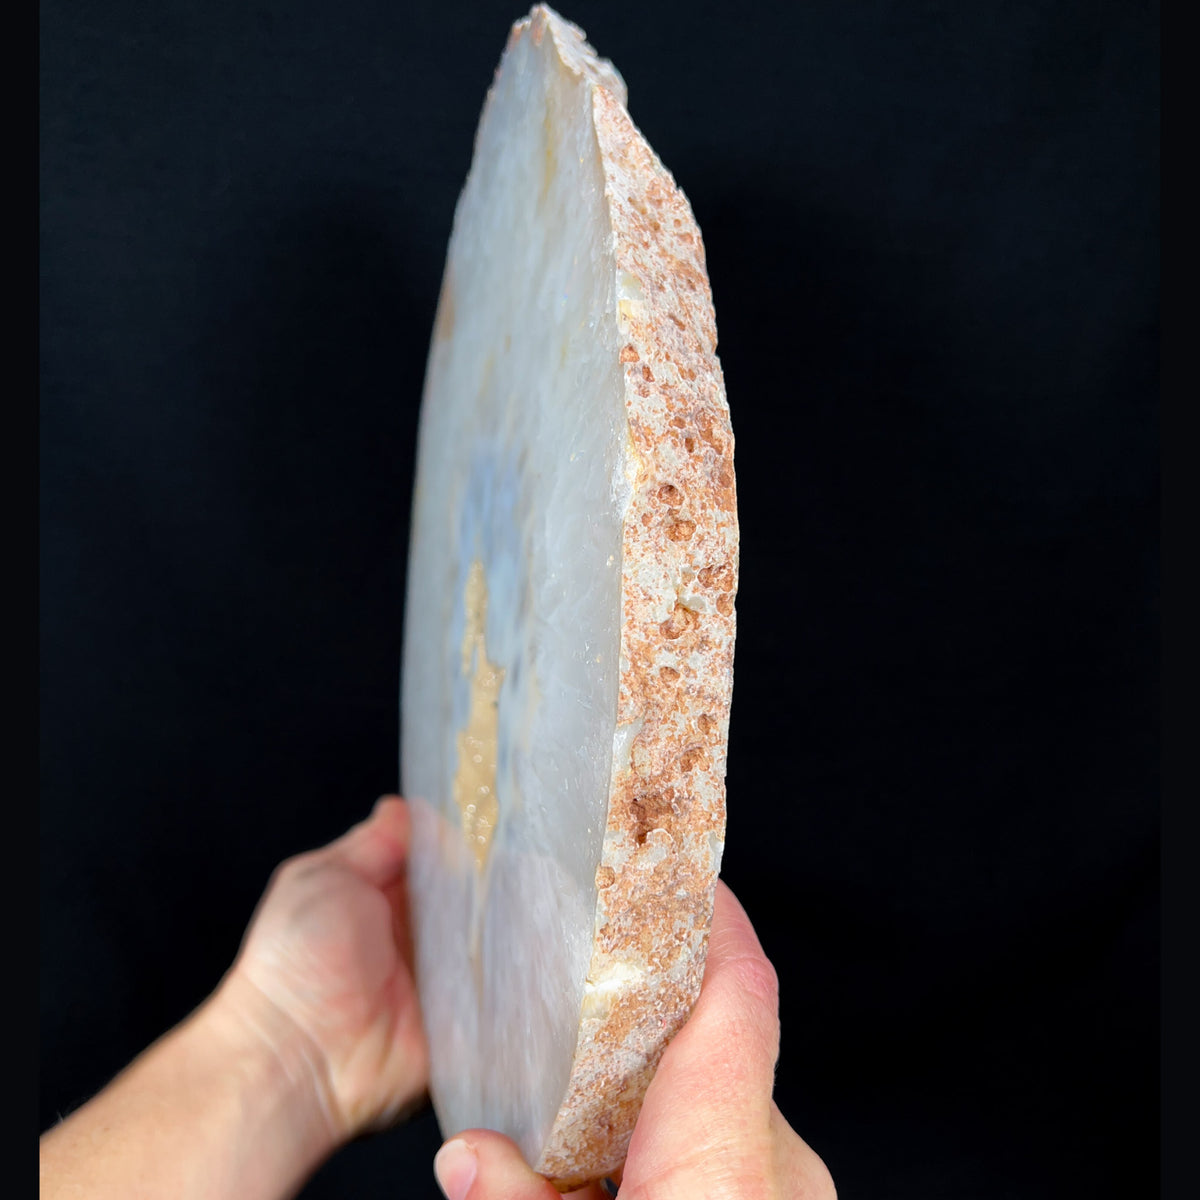 Large Quartz Geode Agate Slice with a Thick Cut